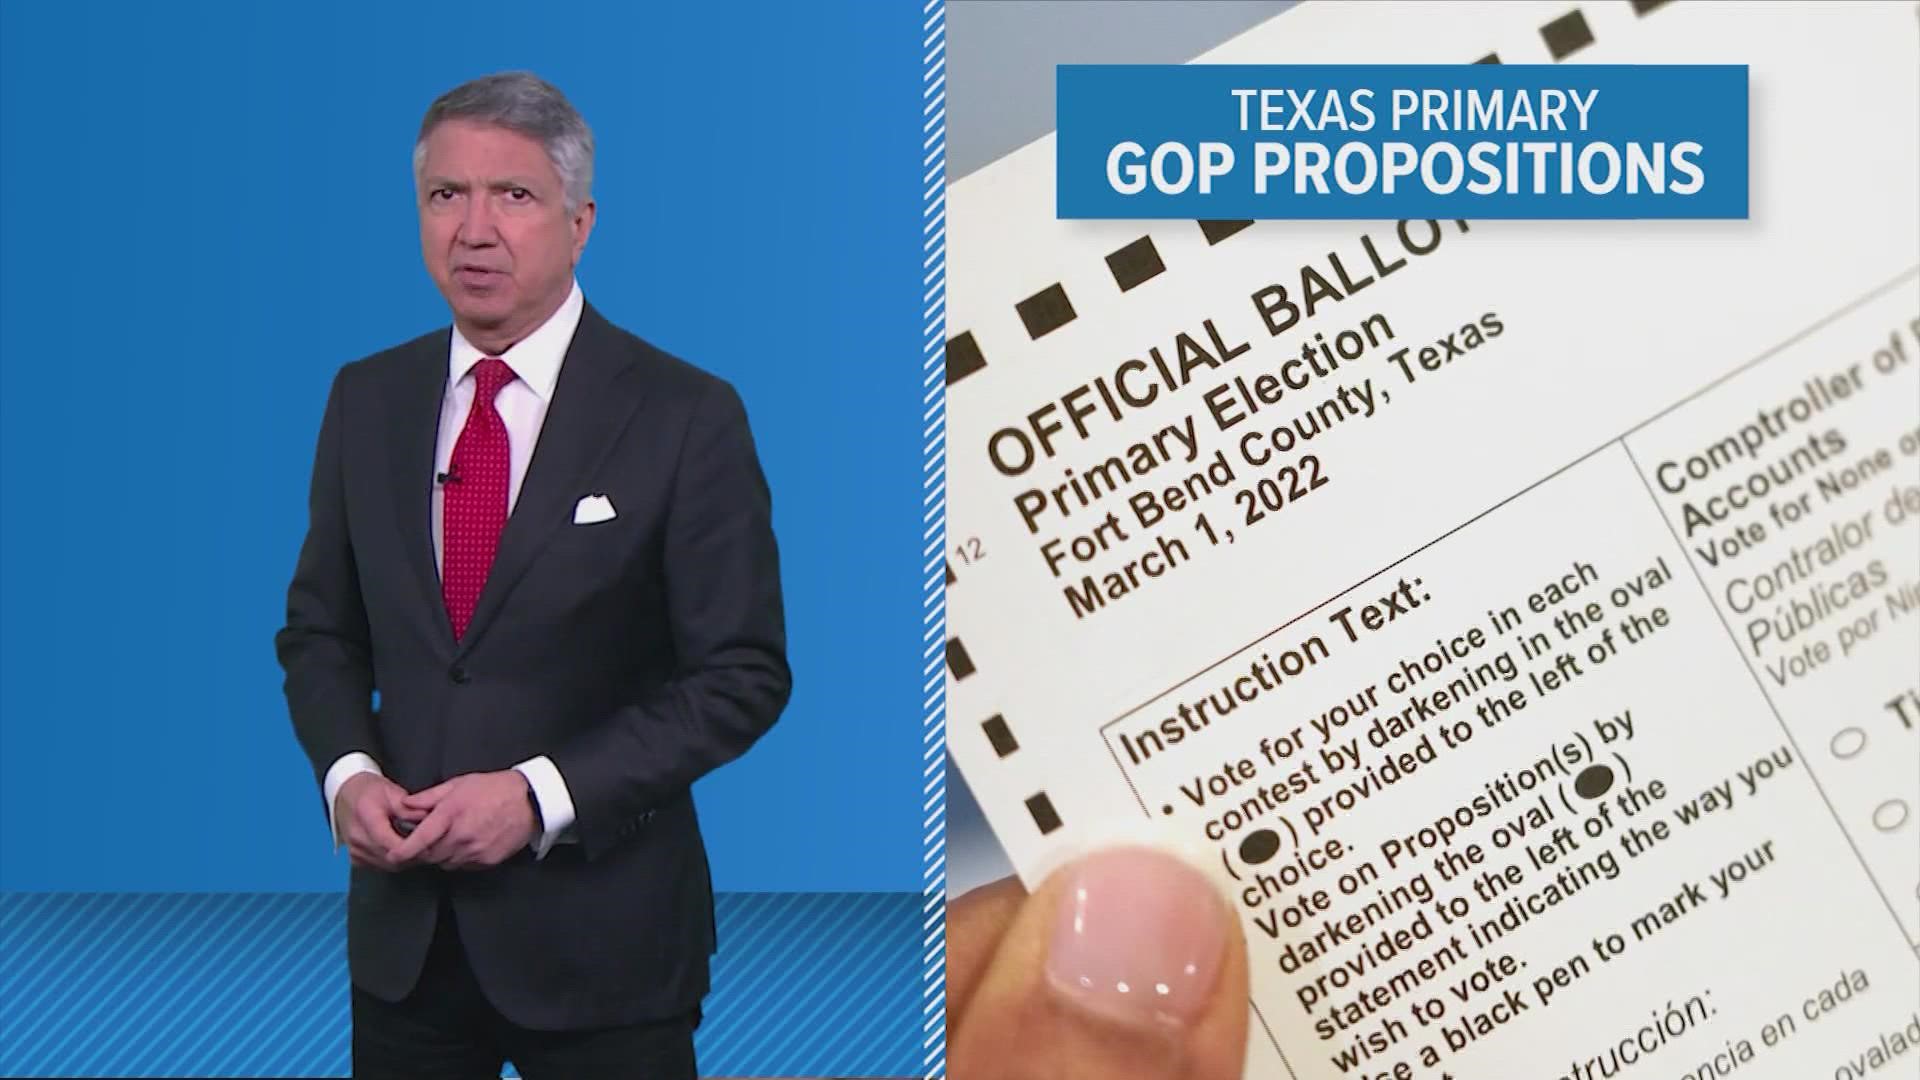 GOP voters will be asked to weigh in on 10 propositions.